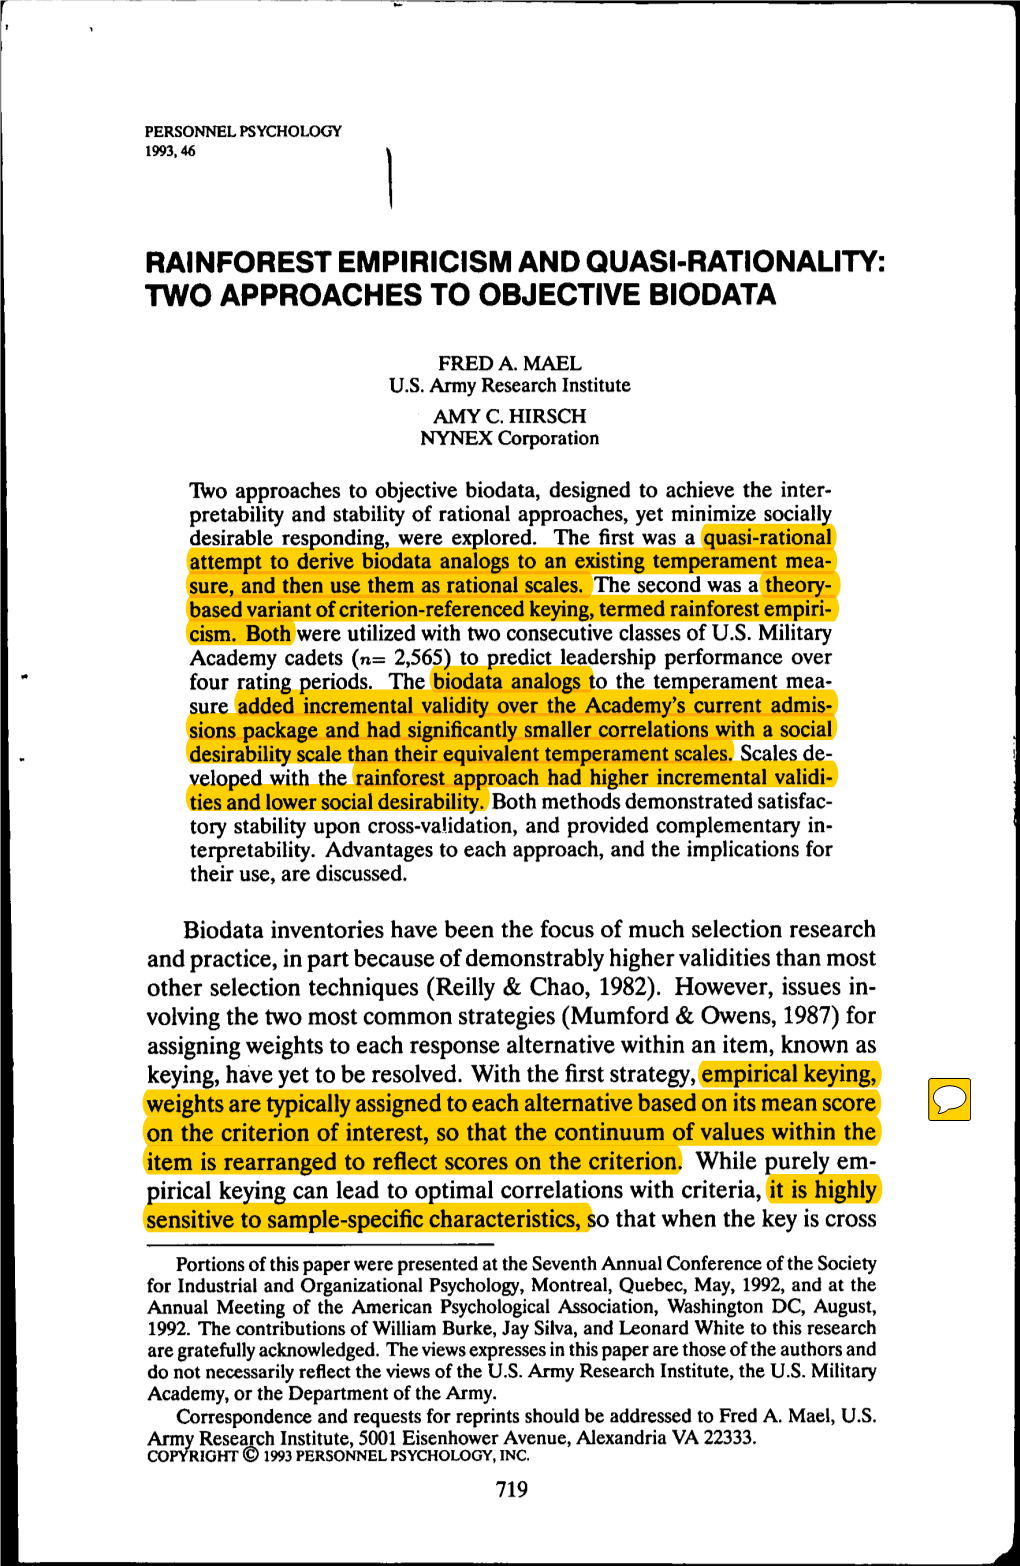 Rainforest Empiricism and Quasi-Rationality: Two Approaches to Objective Biodata